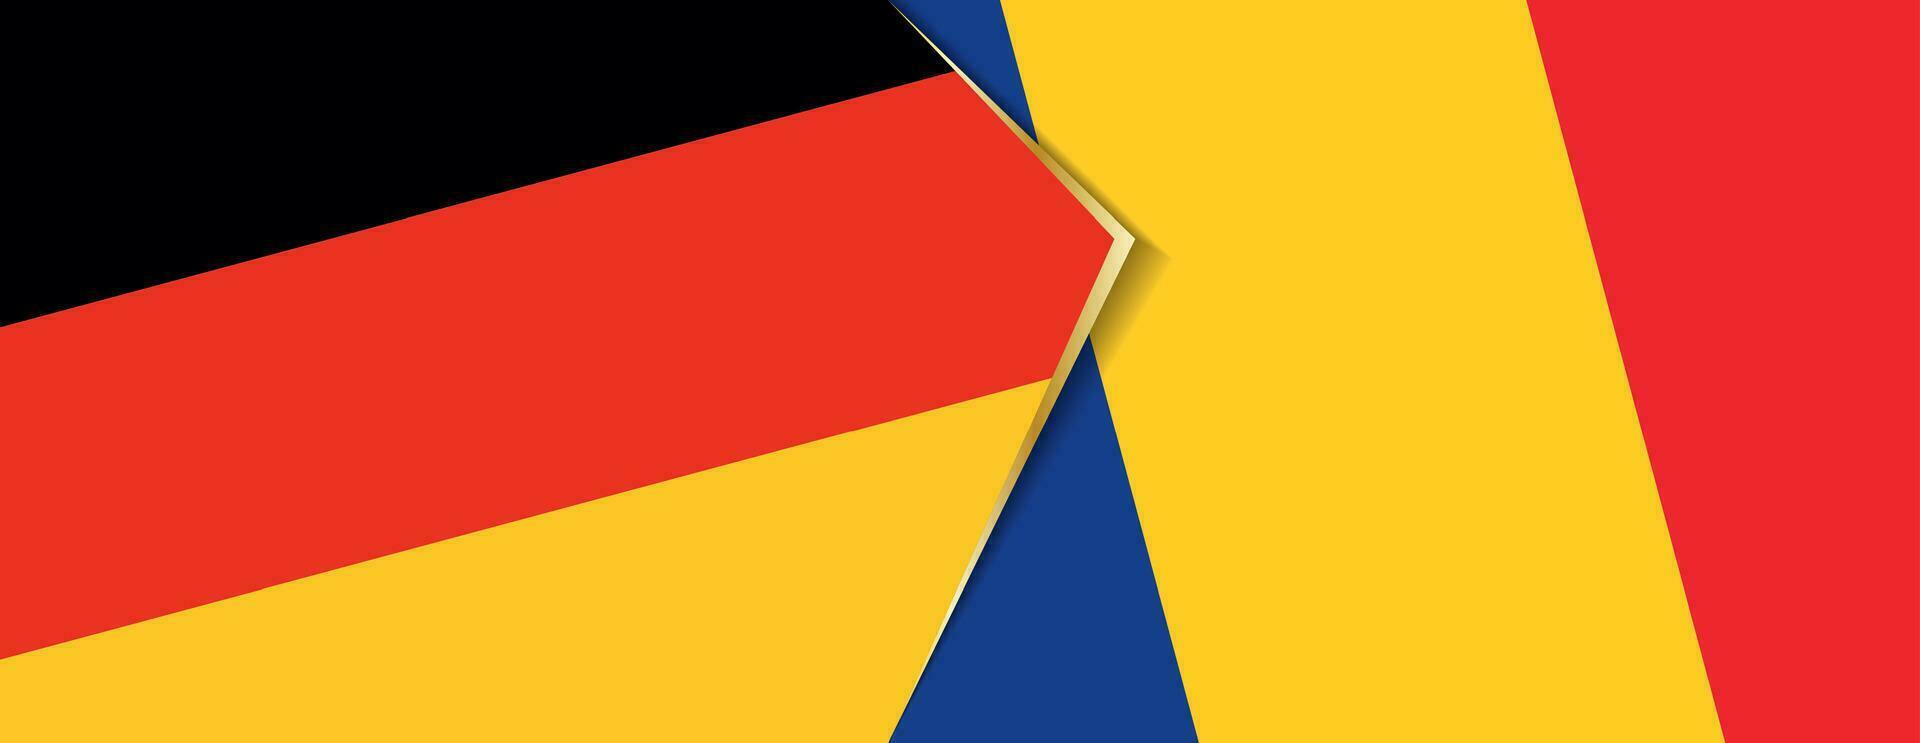 Germany and Romania flags, two vector flags